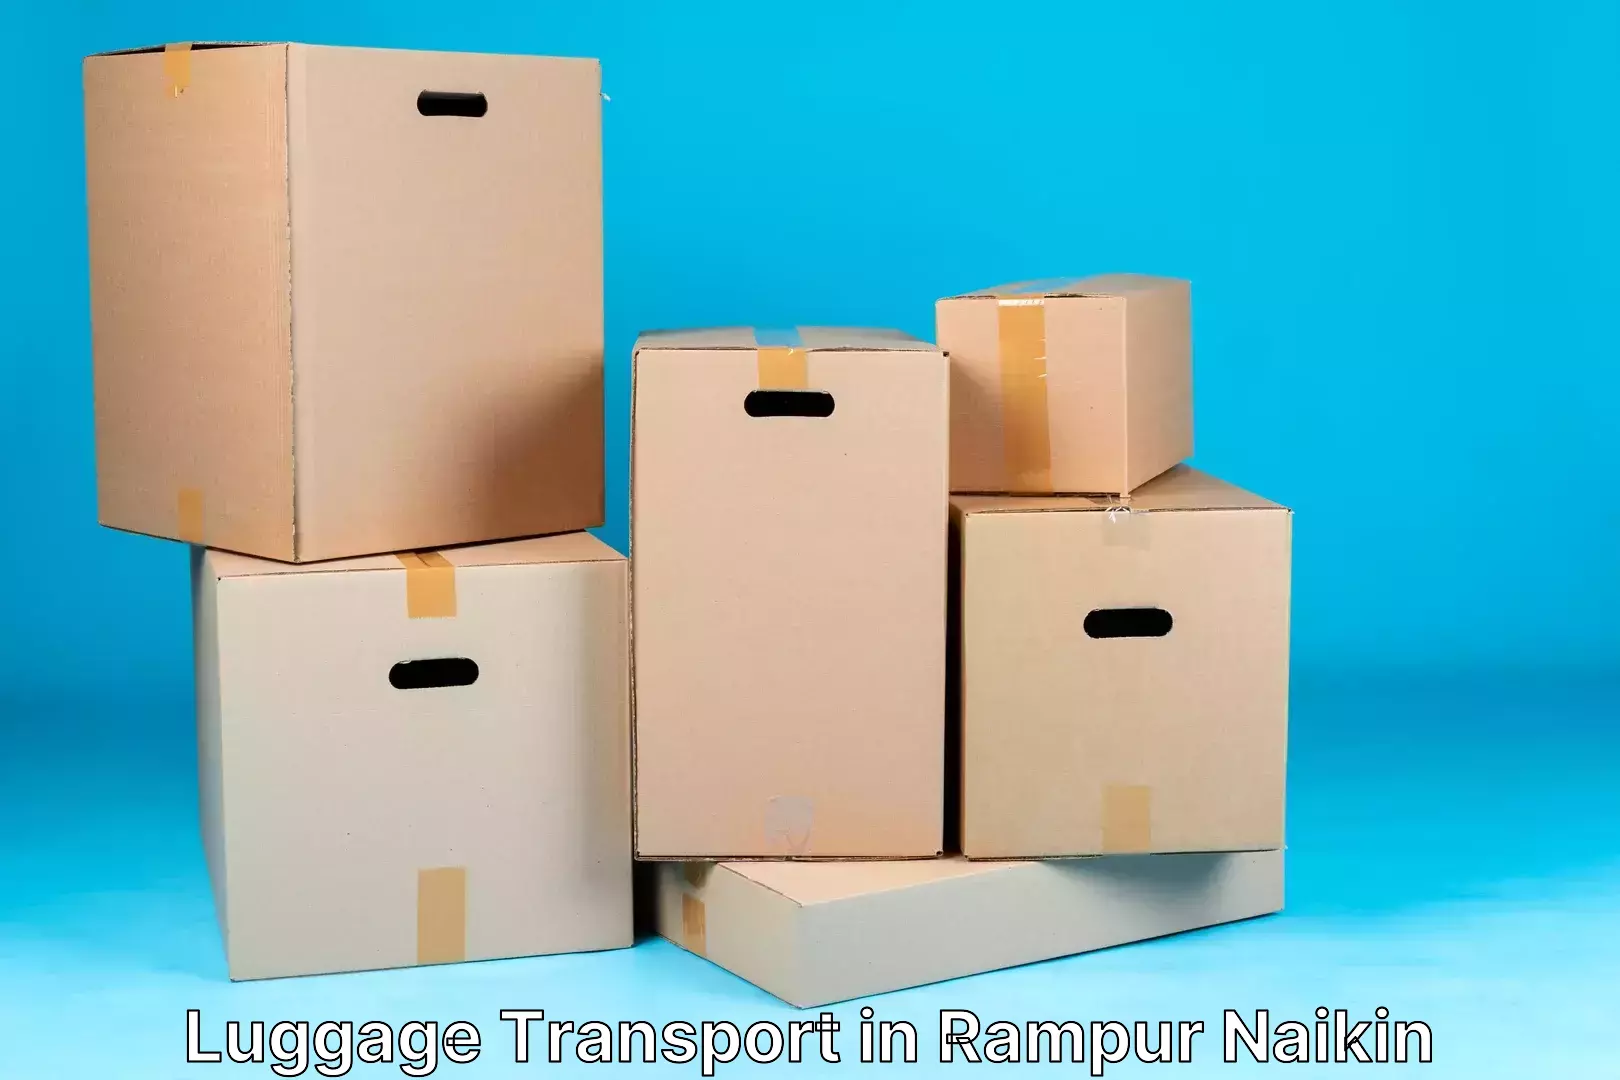 Luggage delivery network in Rampur Naikin